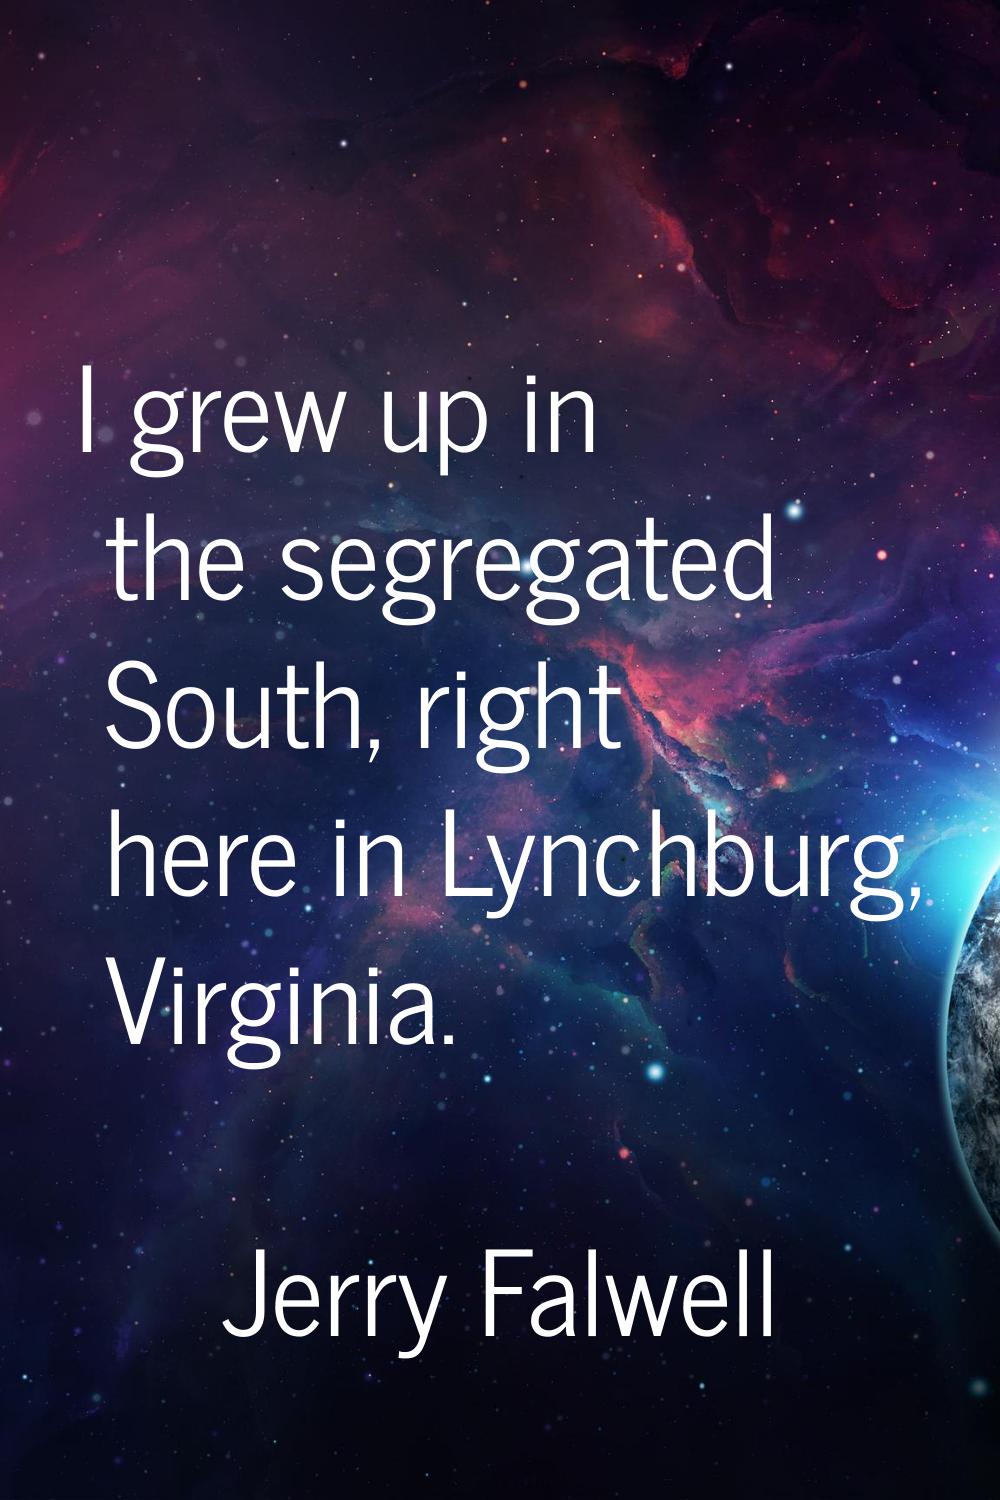 I grew up in the segregated South, right here in Lynchburg, Virginia.